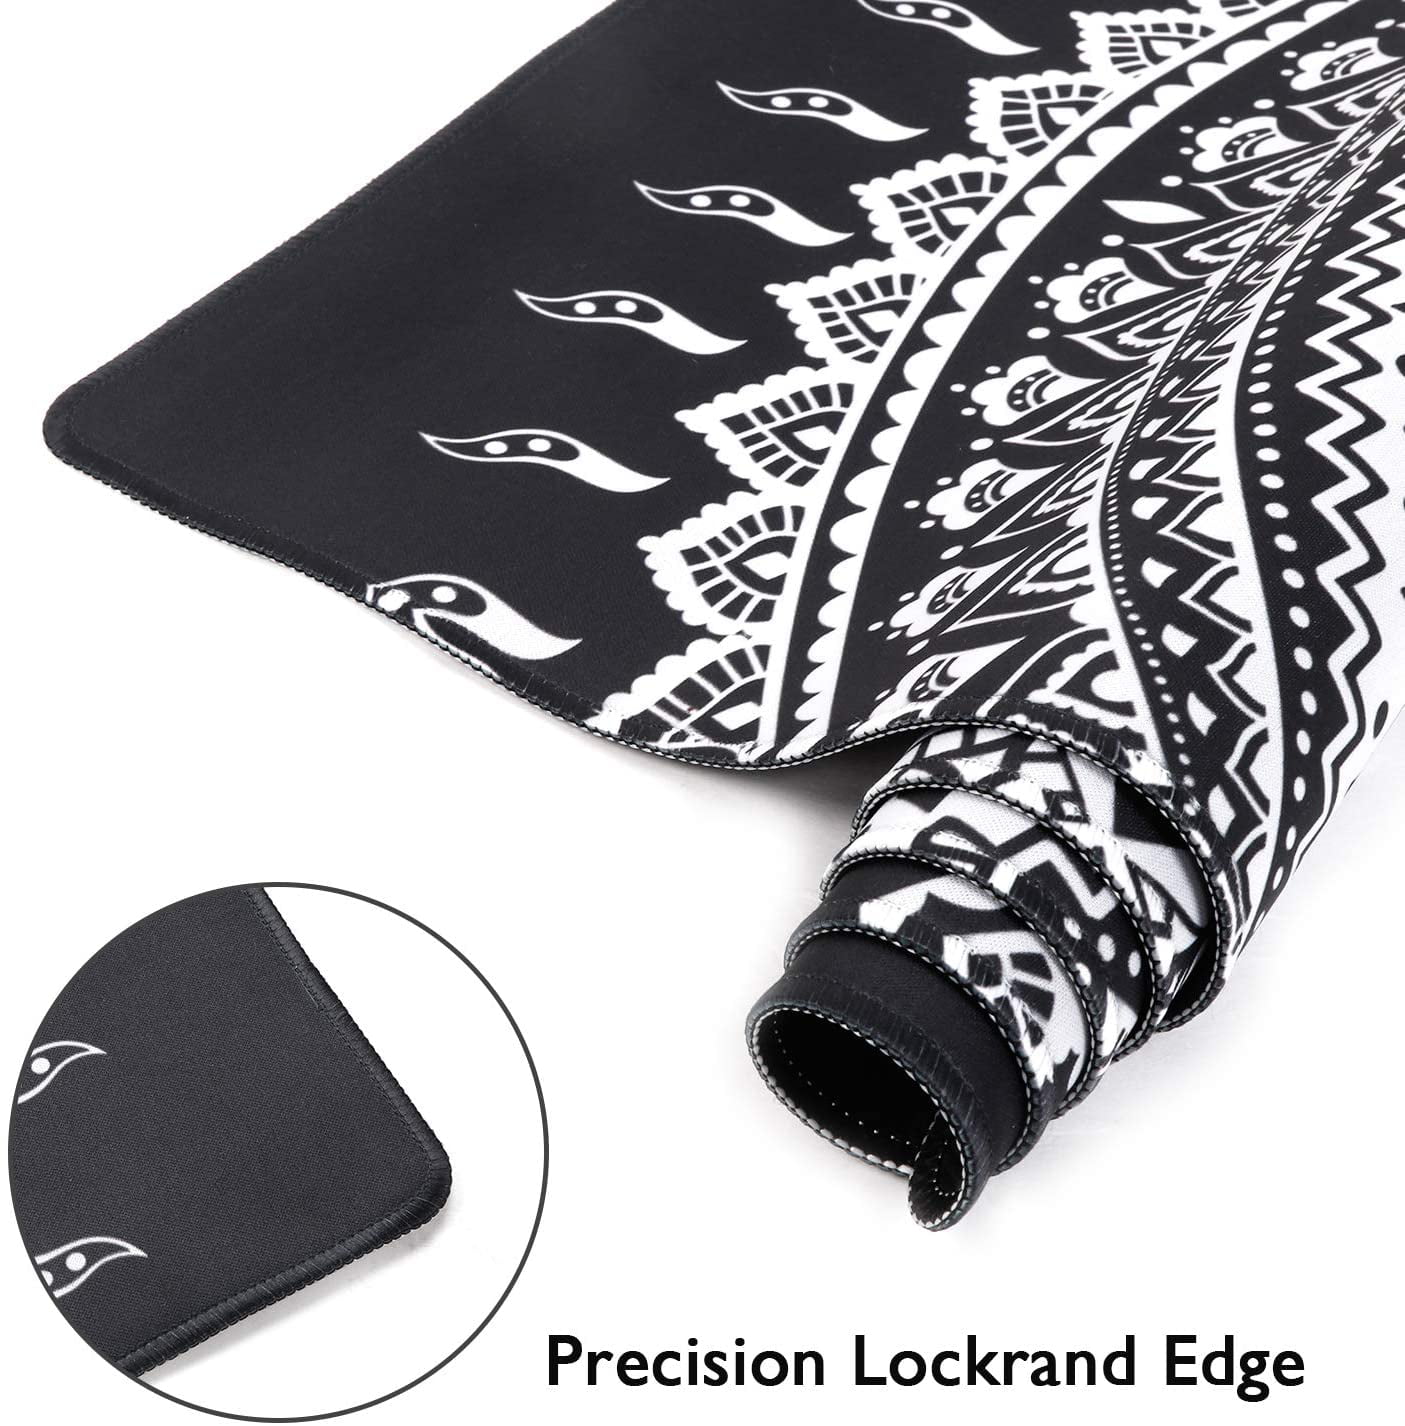 Cute Desk Decor Office Desk Writing Pad with Non-Slip Rubber Base for Home Office Work Accessories iLeadon Desk Pad Protector Black Mandala Large Gaming Mouse Pad 35.1 x 15.75-inch 2.5mm Thick 